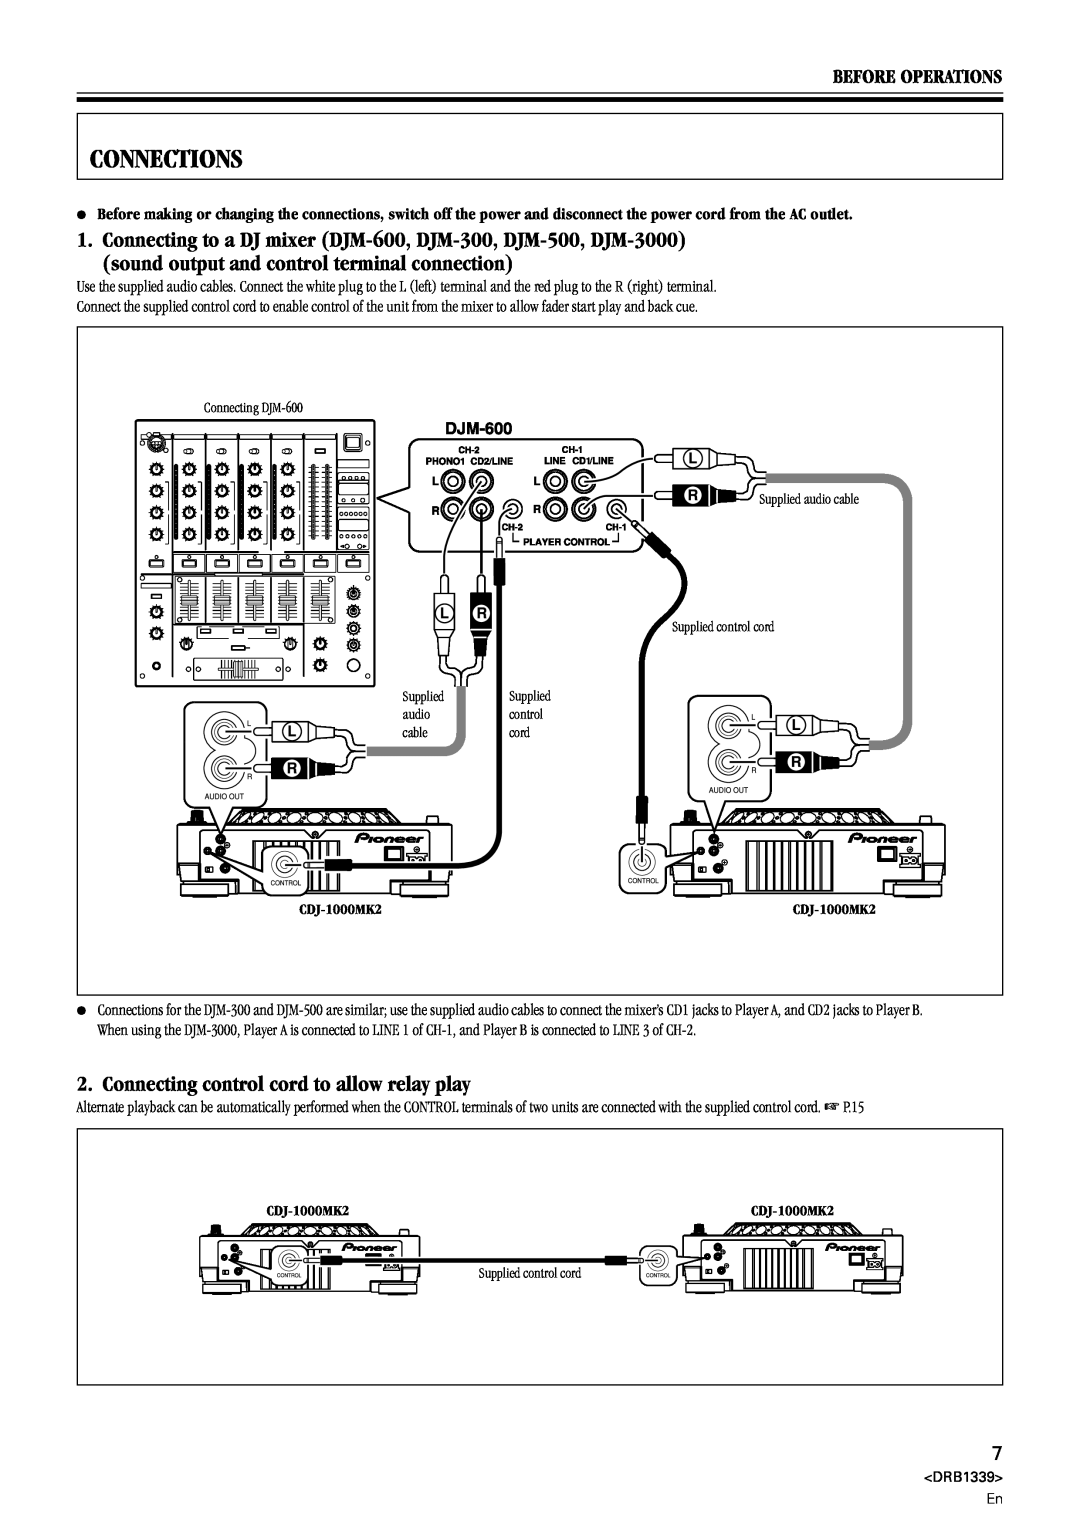 Pioneer CDJ-1000MK2 manual Connections, Connecting control cord to allow relay play, Before Operations 